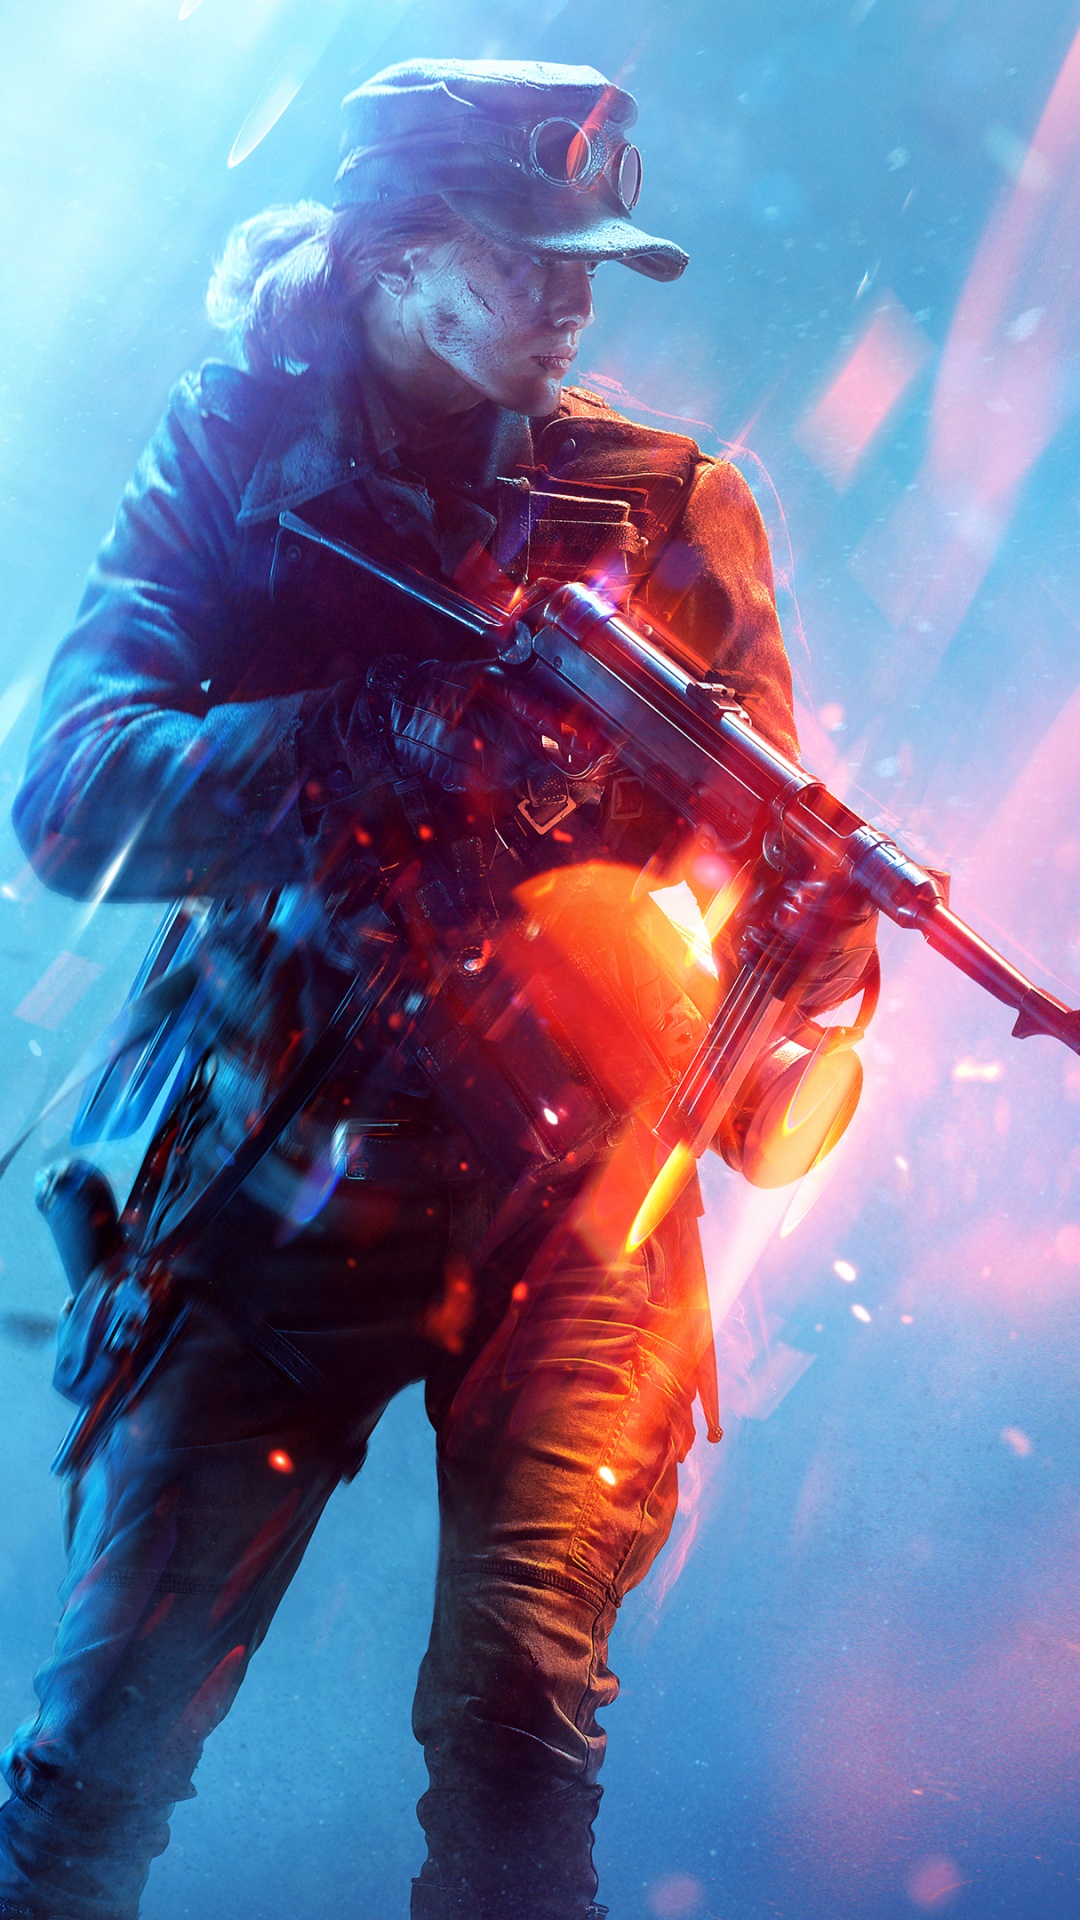 Battlefield V 4K Wallpaper, PlayStation 4, Xbox One, PC Games, 2020 Games, Games, #1278